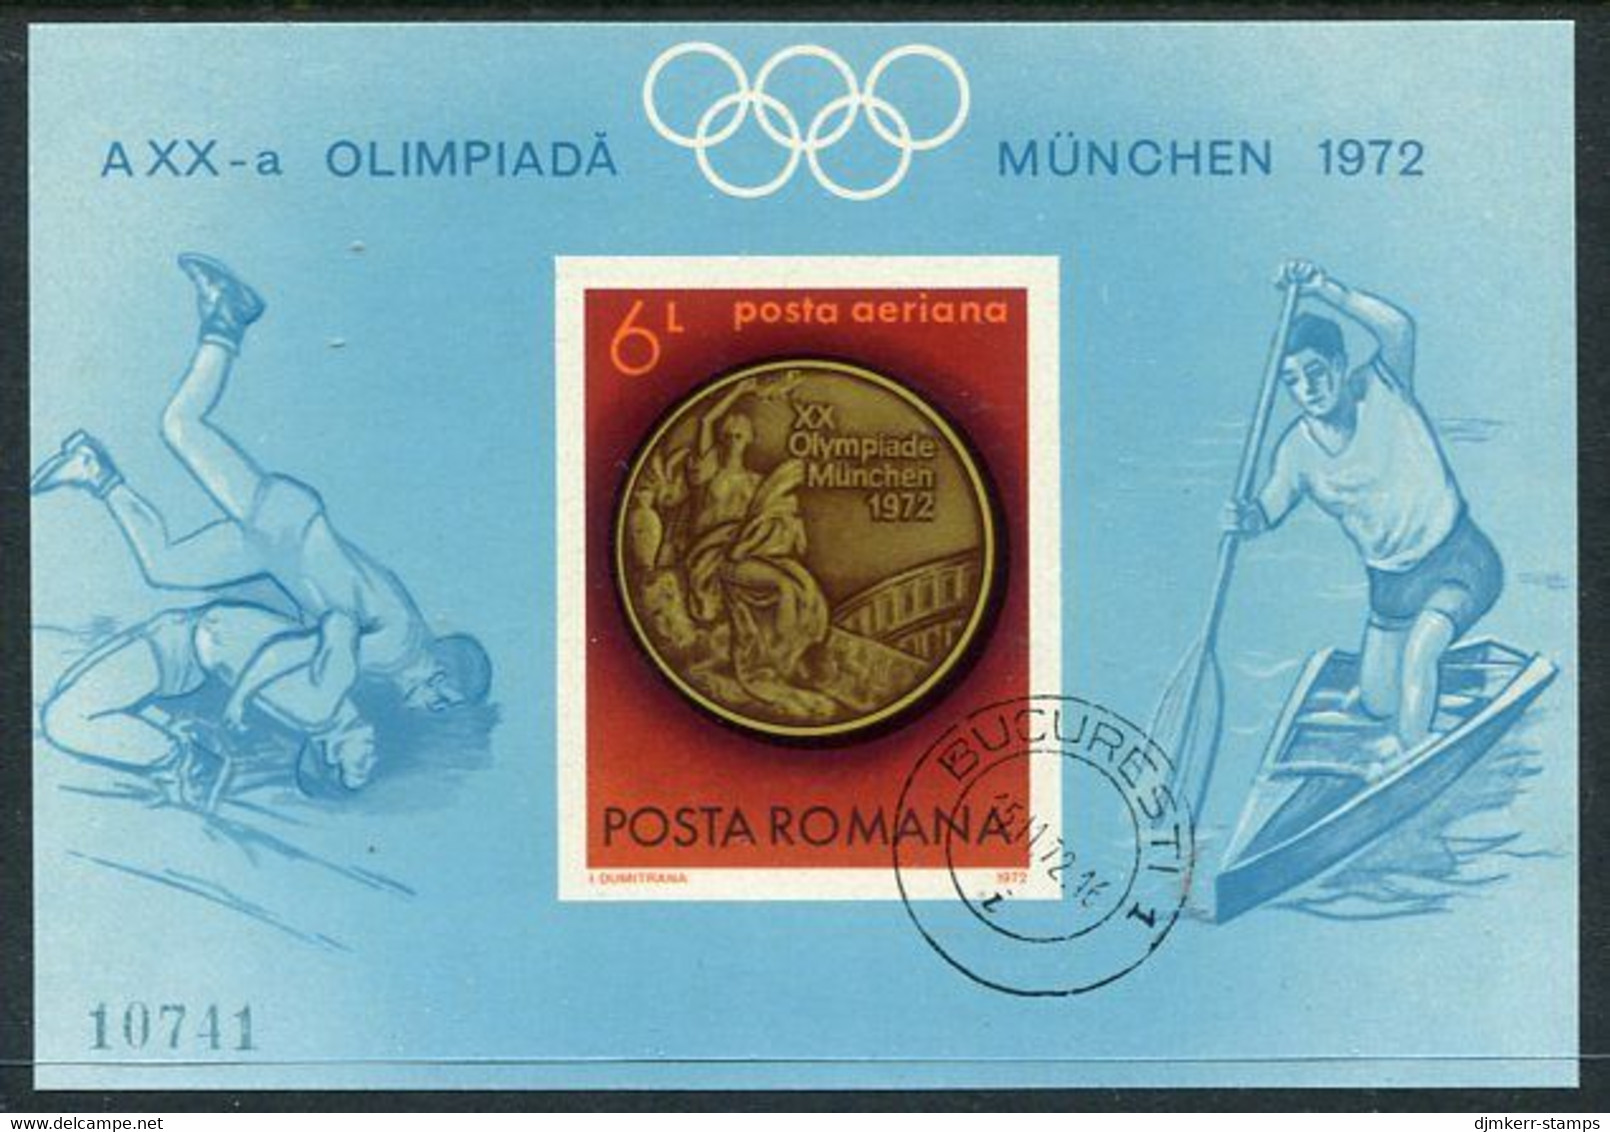 ROMANIA 1972 Olympic Medals Imperforate Block Used.  Michel Block 101 - Blocks & Sheetlets